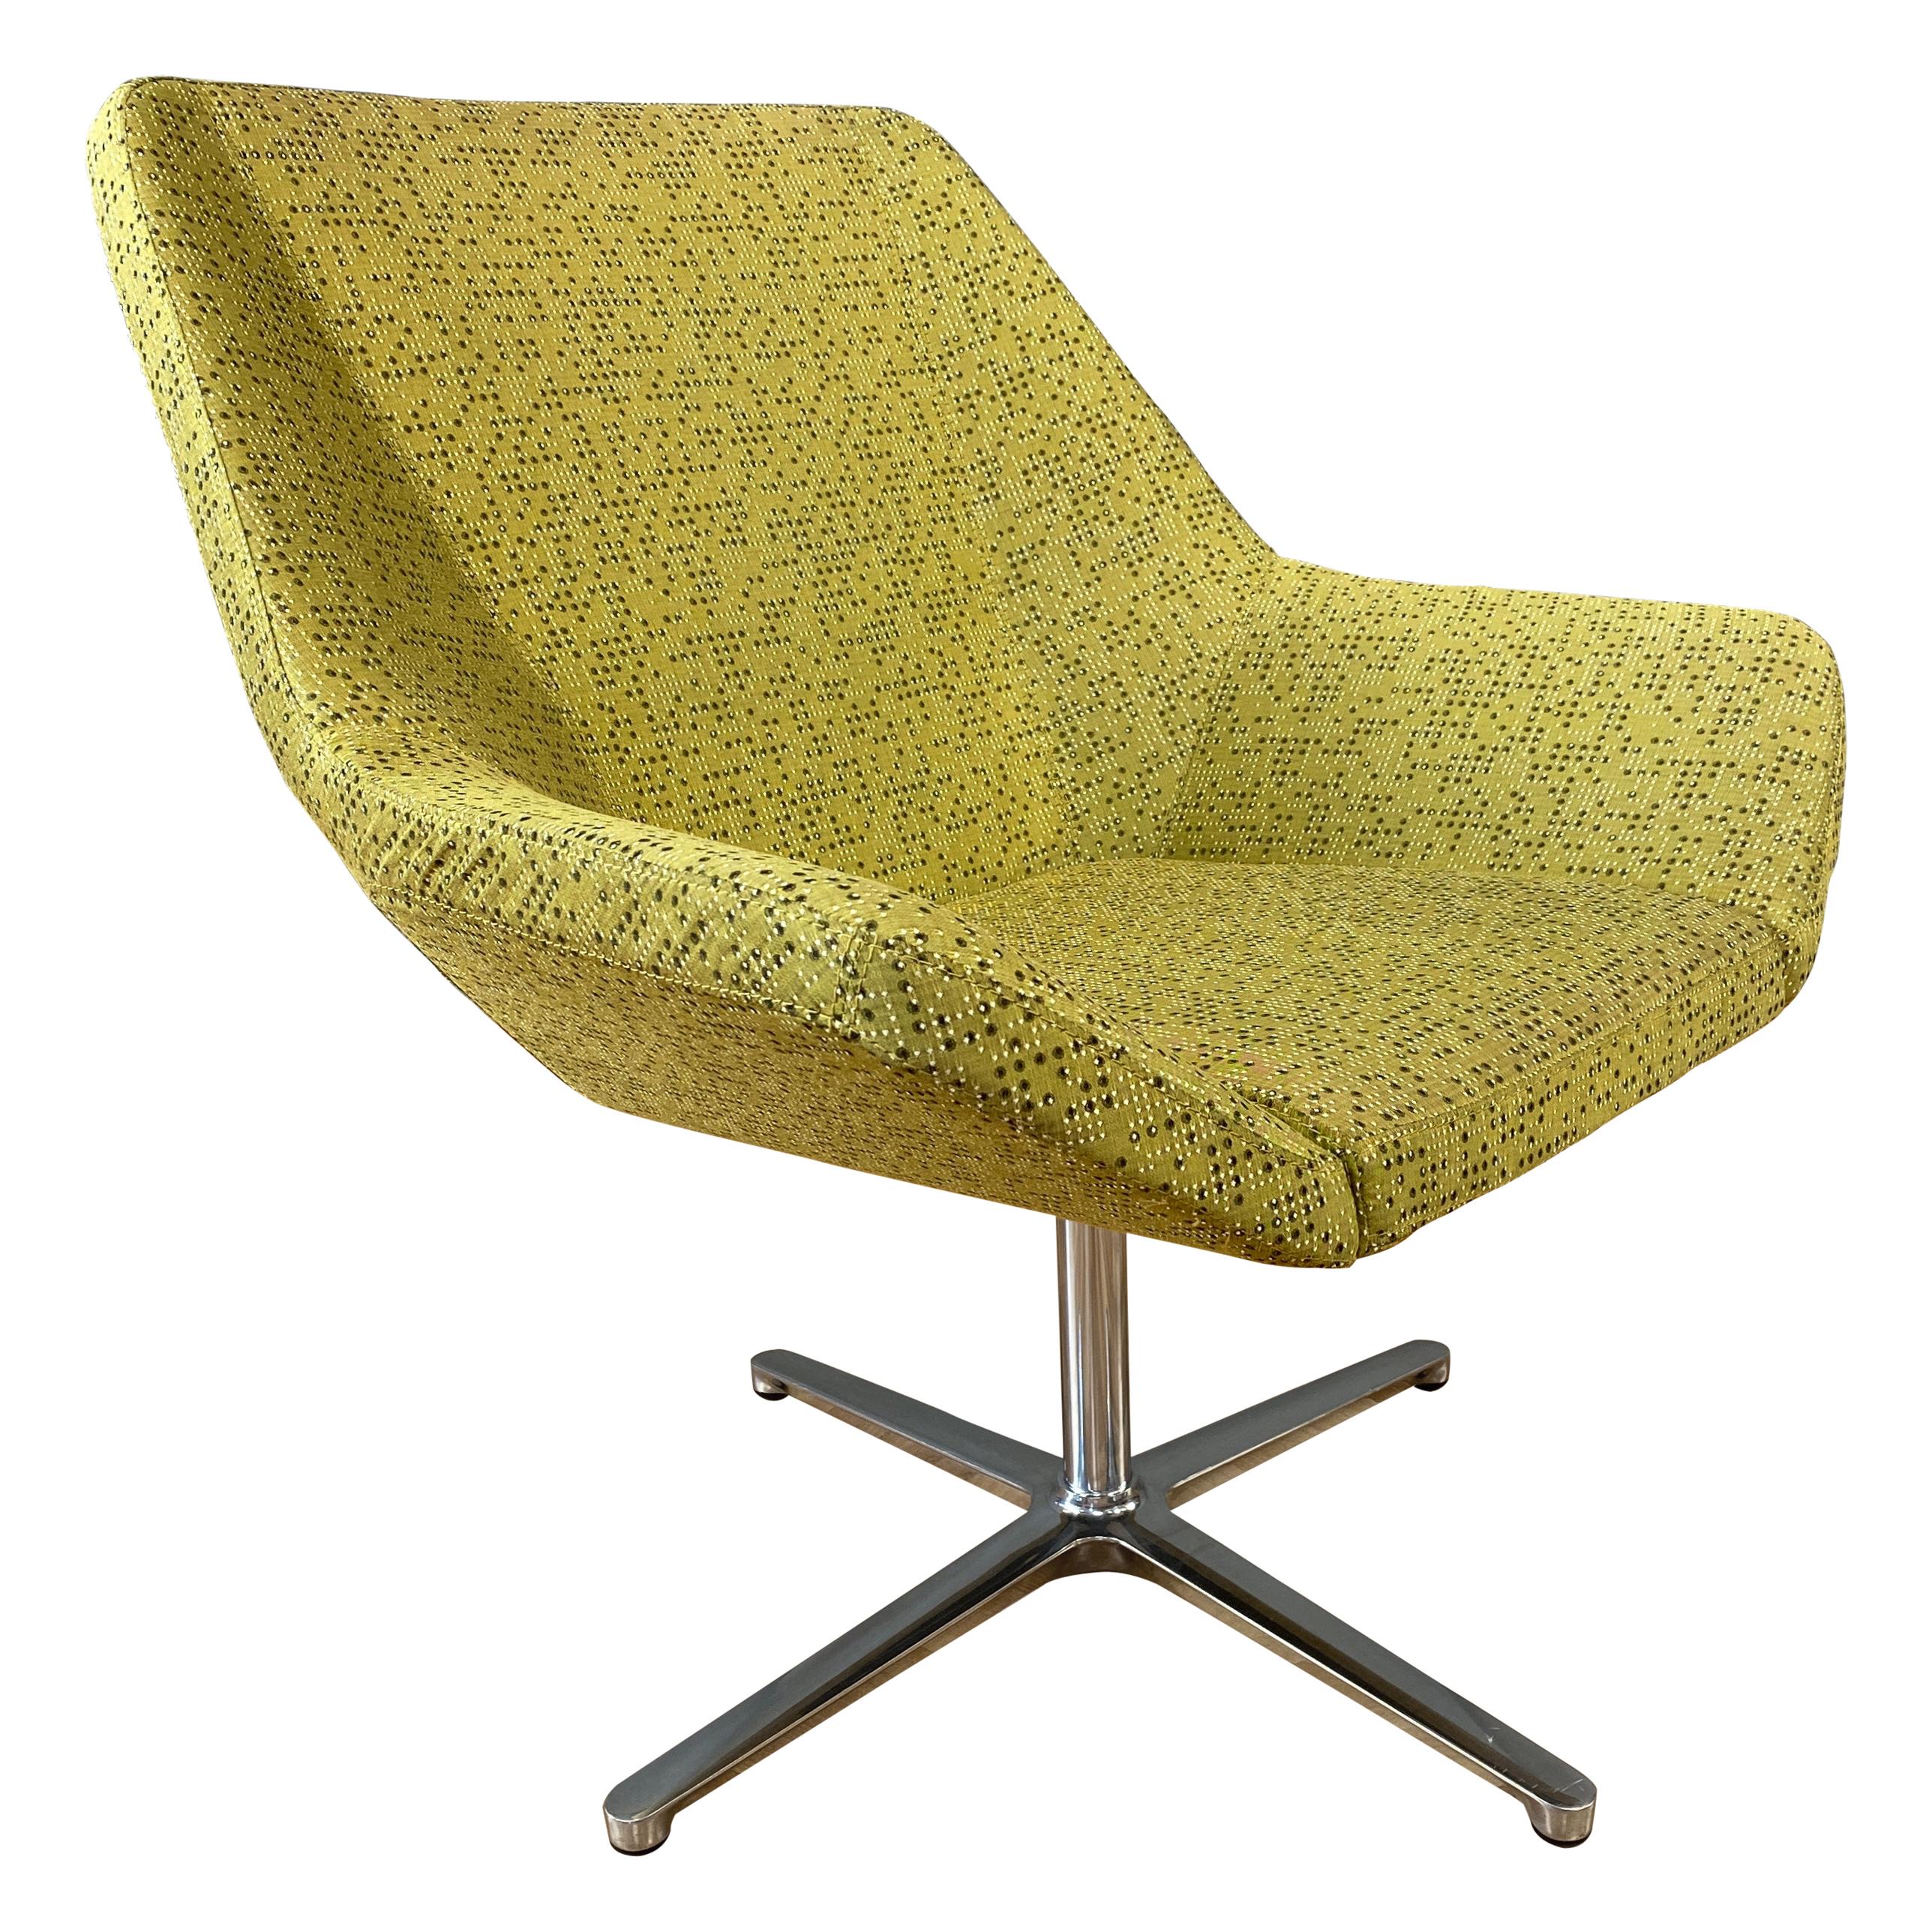 EOOS designed Cahoots Relax Chair for Keilhauer in Chartreuse C